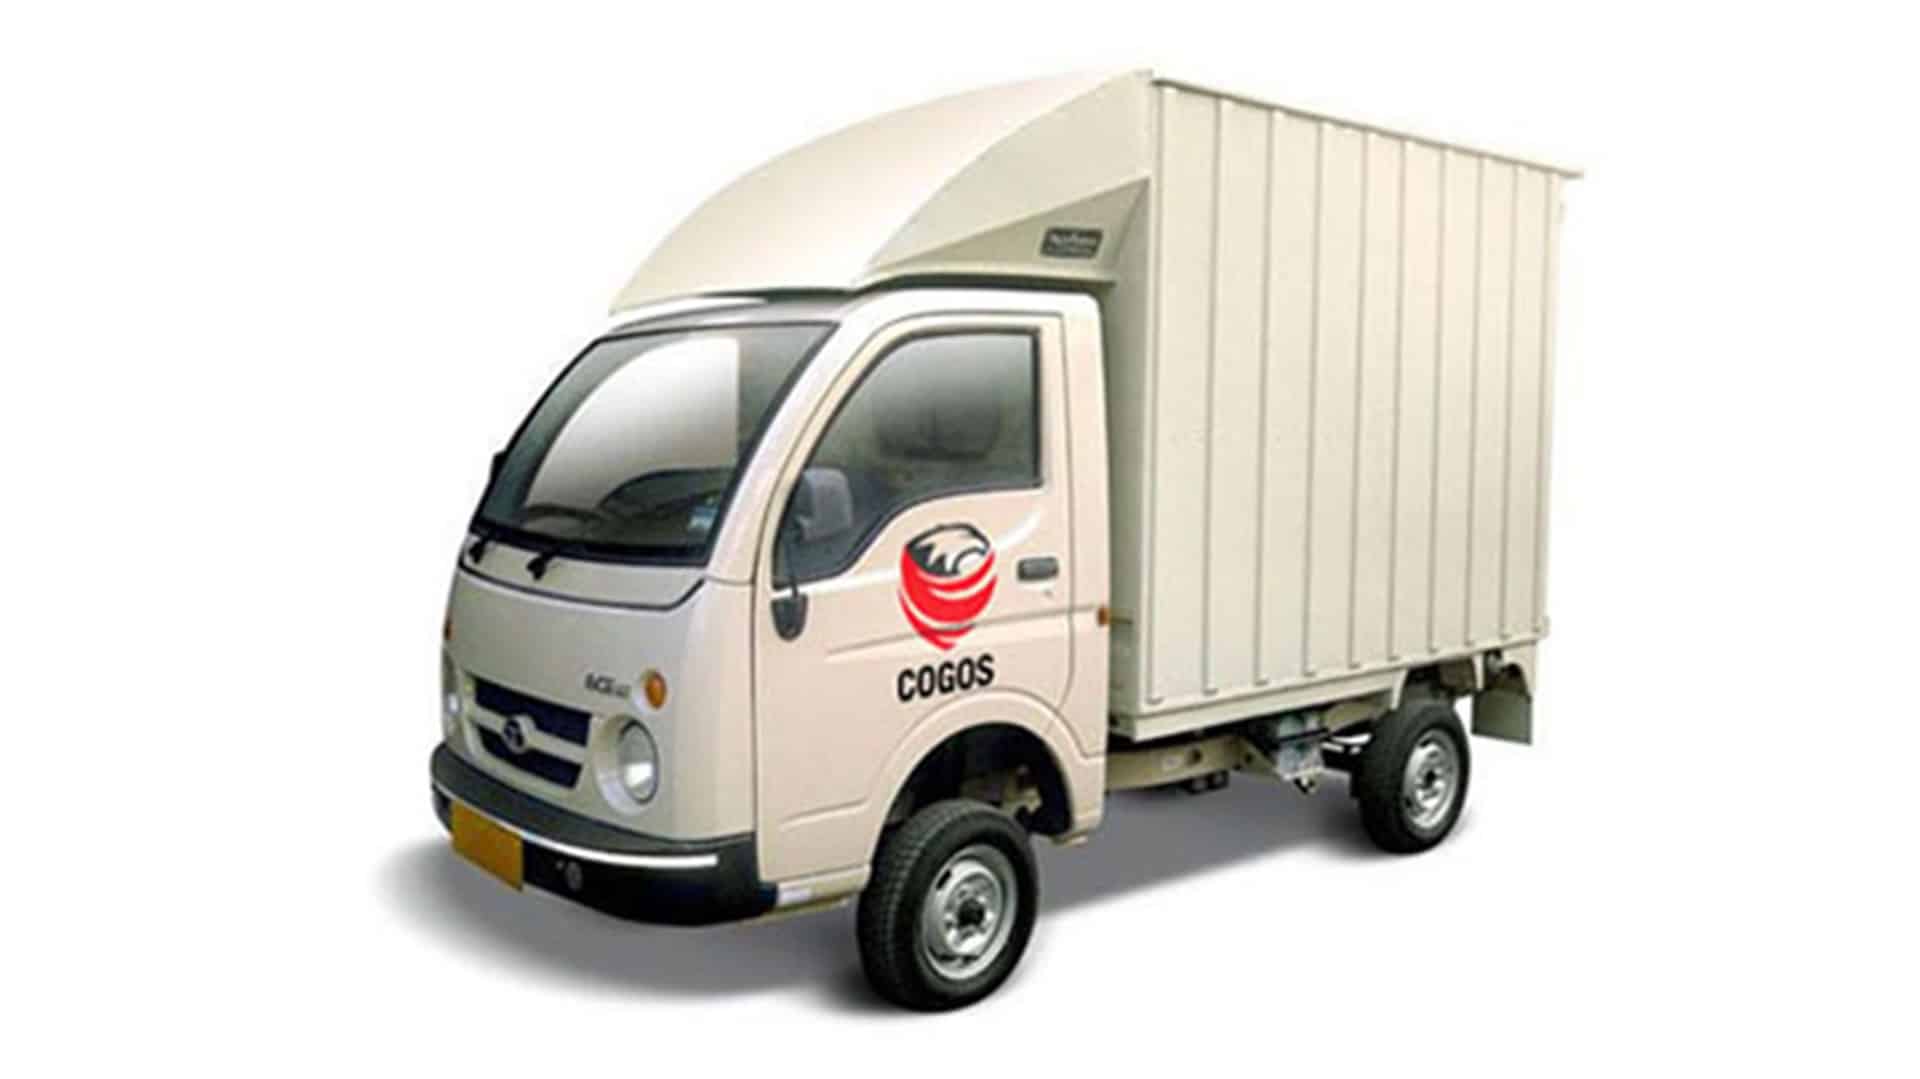 COGOS aims to create Entrepreneurial opportunity for Women in Logistics